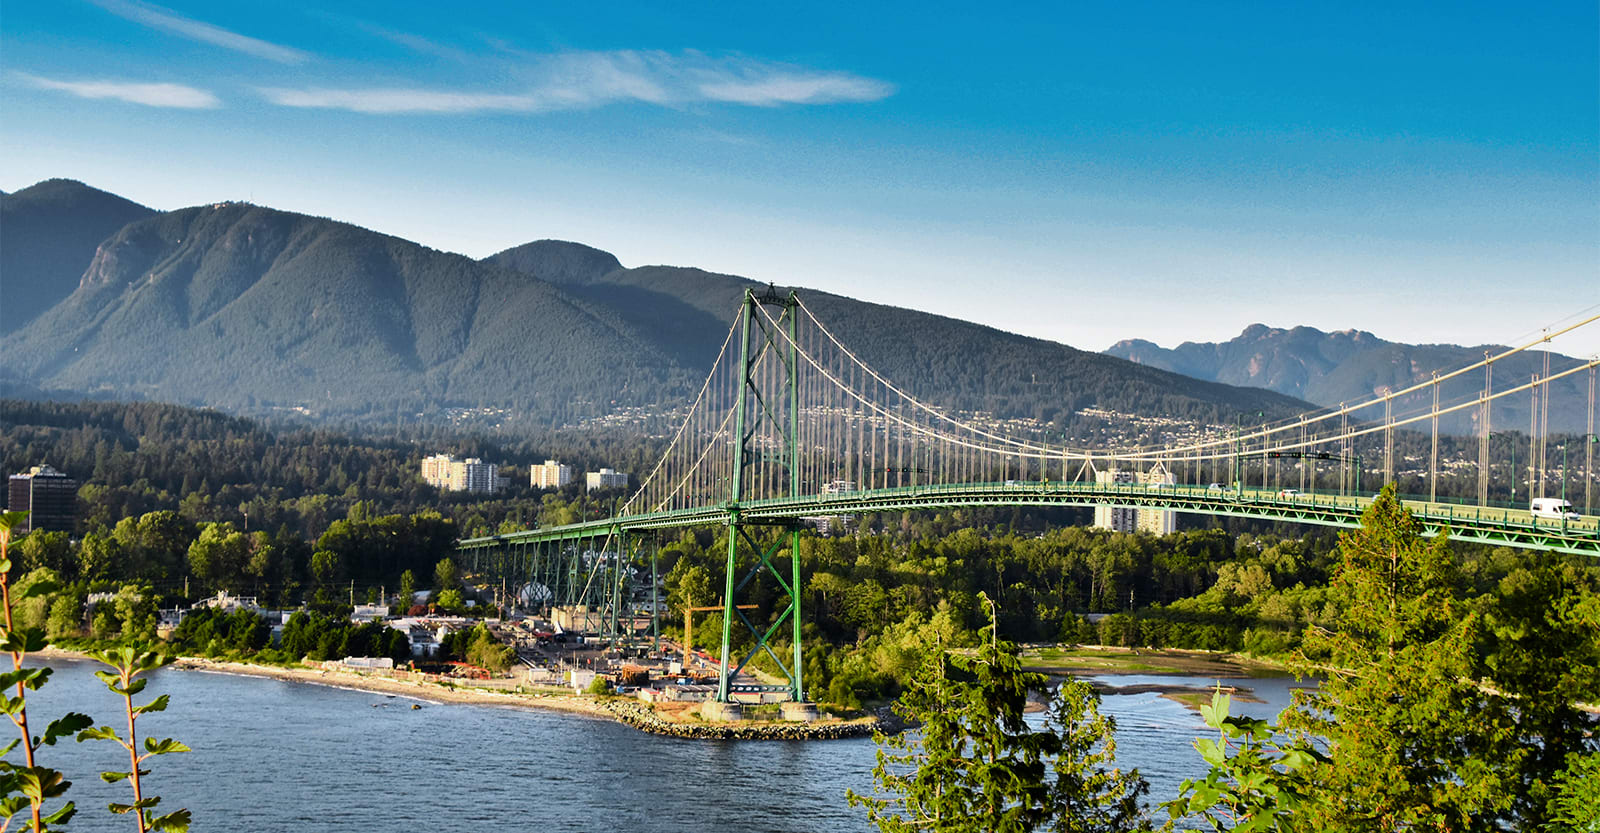  Vancouver ranks as the fifth most livable city in the world